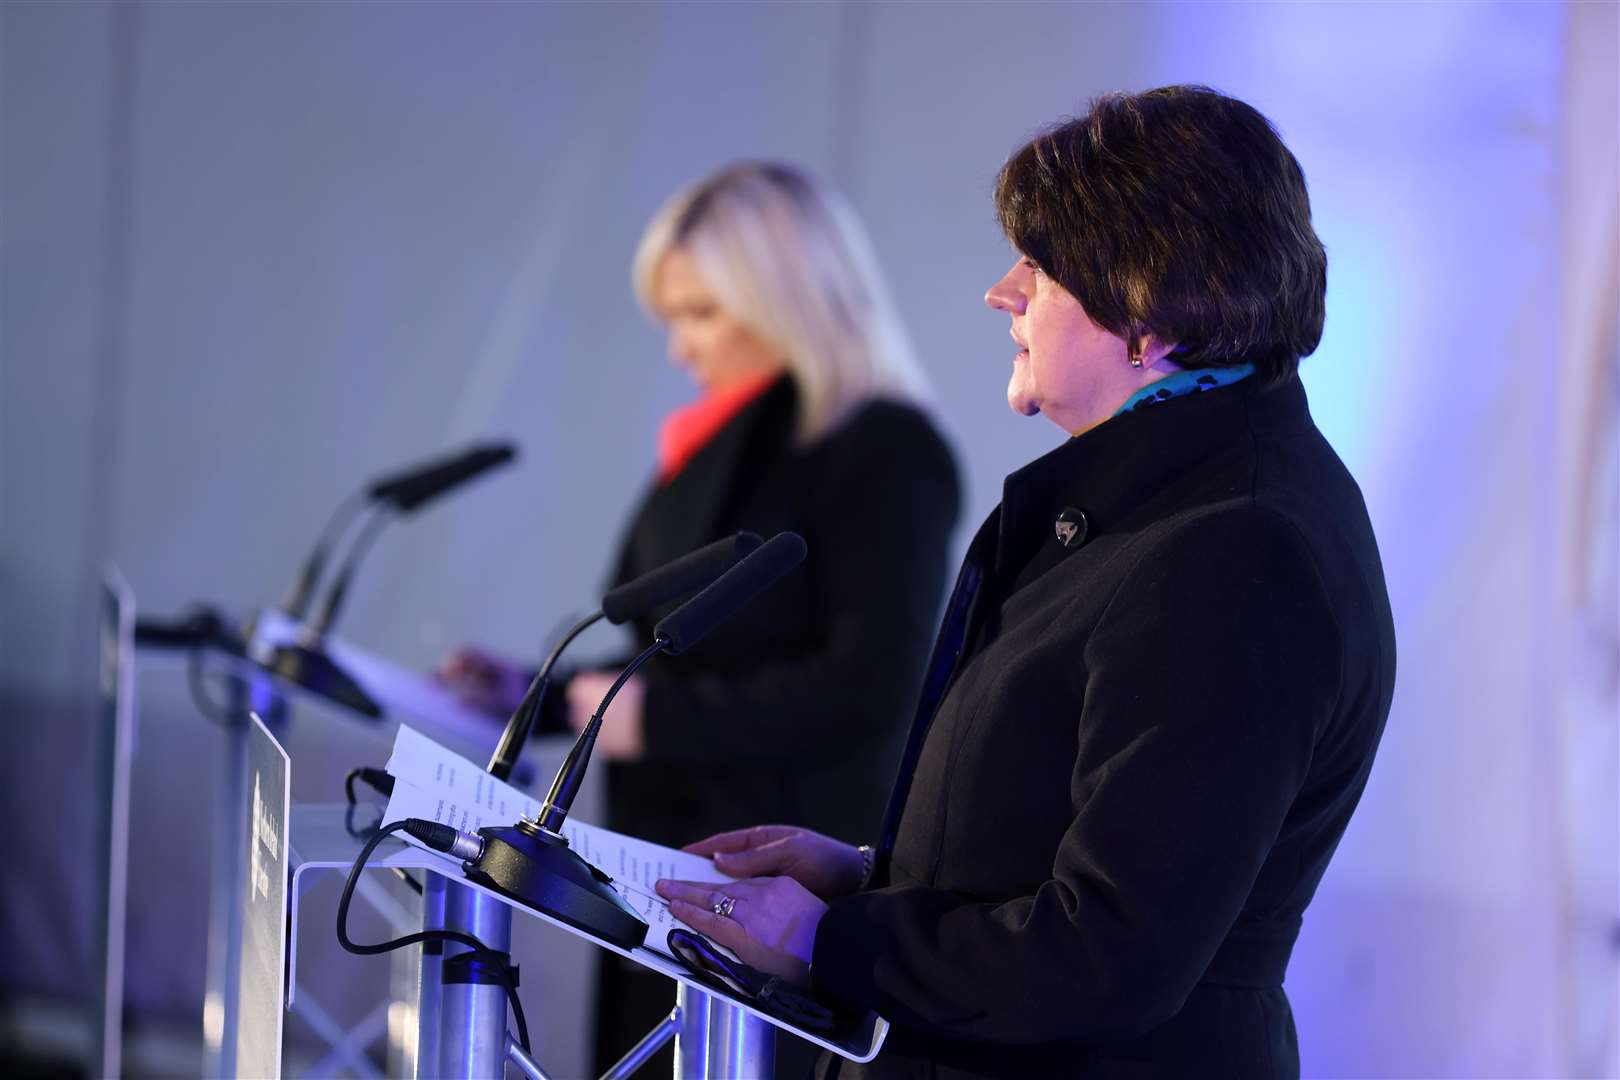 First Minister Arlene Foster and Deputy First Minister Michelle O’Neill during a media briefing at The Hill of O’Neill centre in Dungannon, Co Tyrone (Kelvin Boyes/Press Eye)